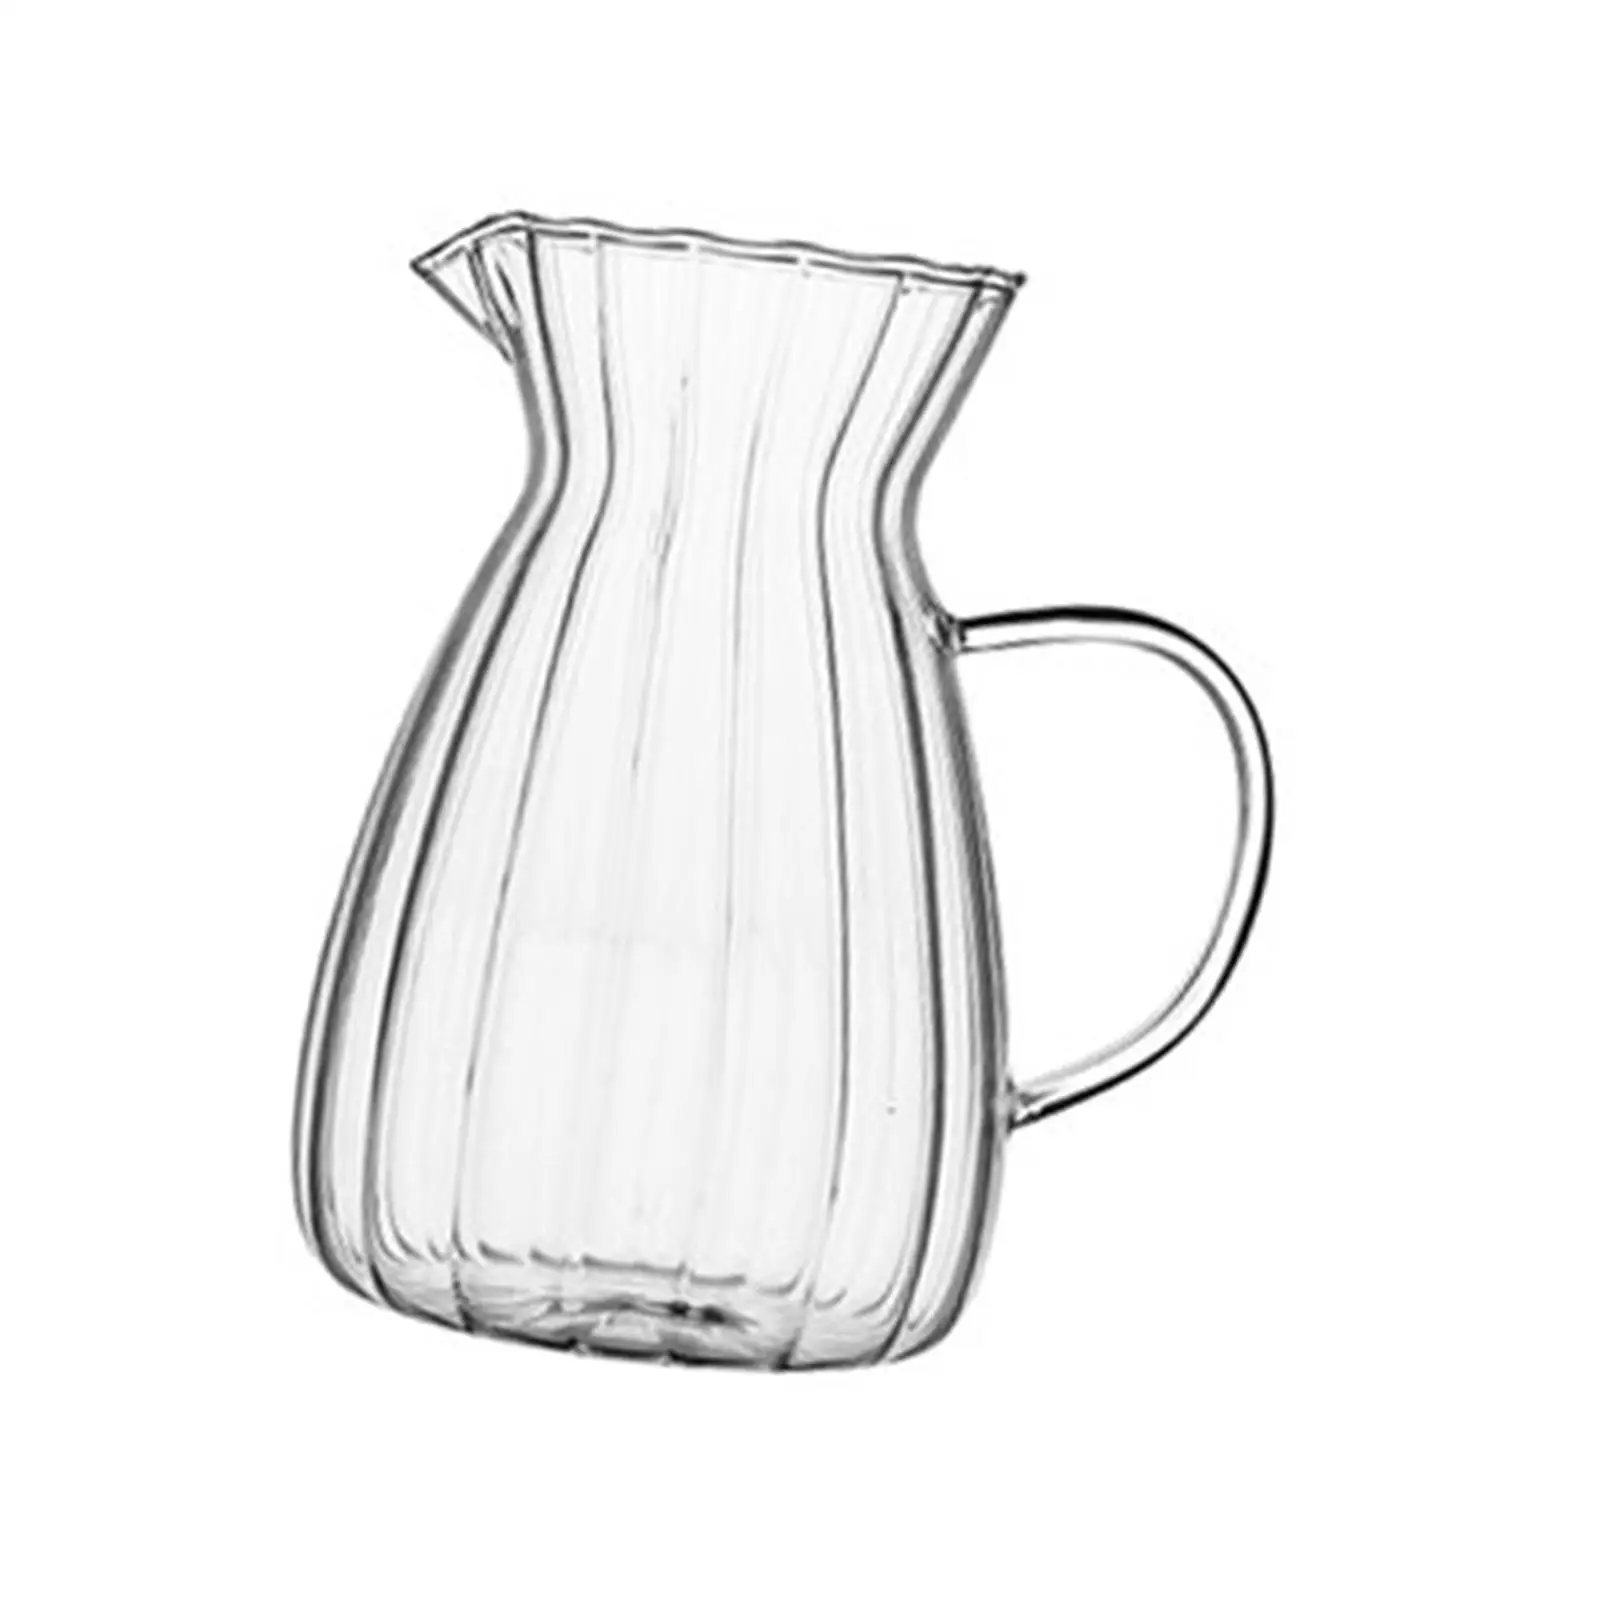 Glass Coffee Sharing Pot Large Capacity Japanese Style Reusable Clear Milk Jug Household for Office Outdoor Tour